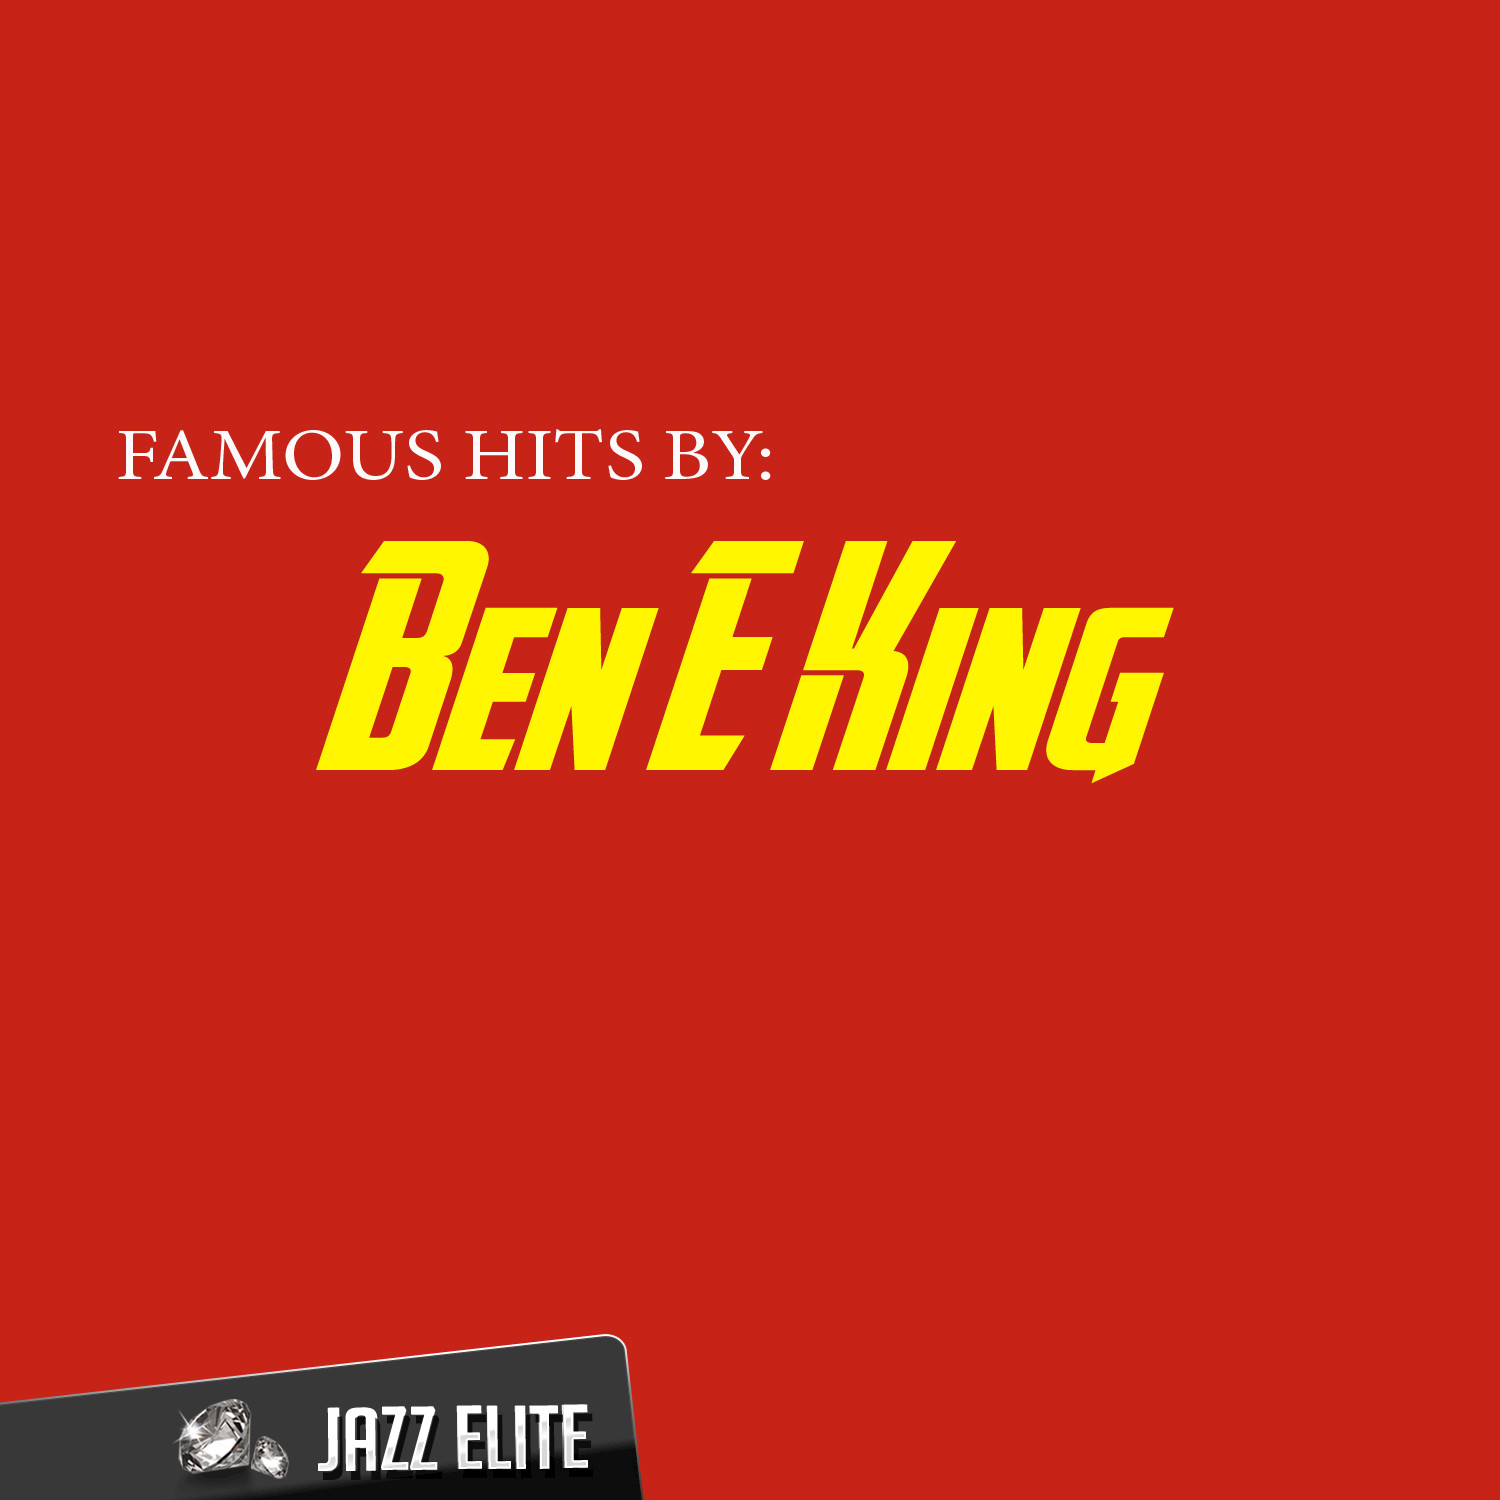 Famous Hits by Ben E. King